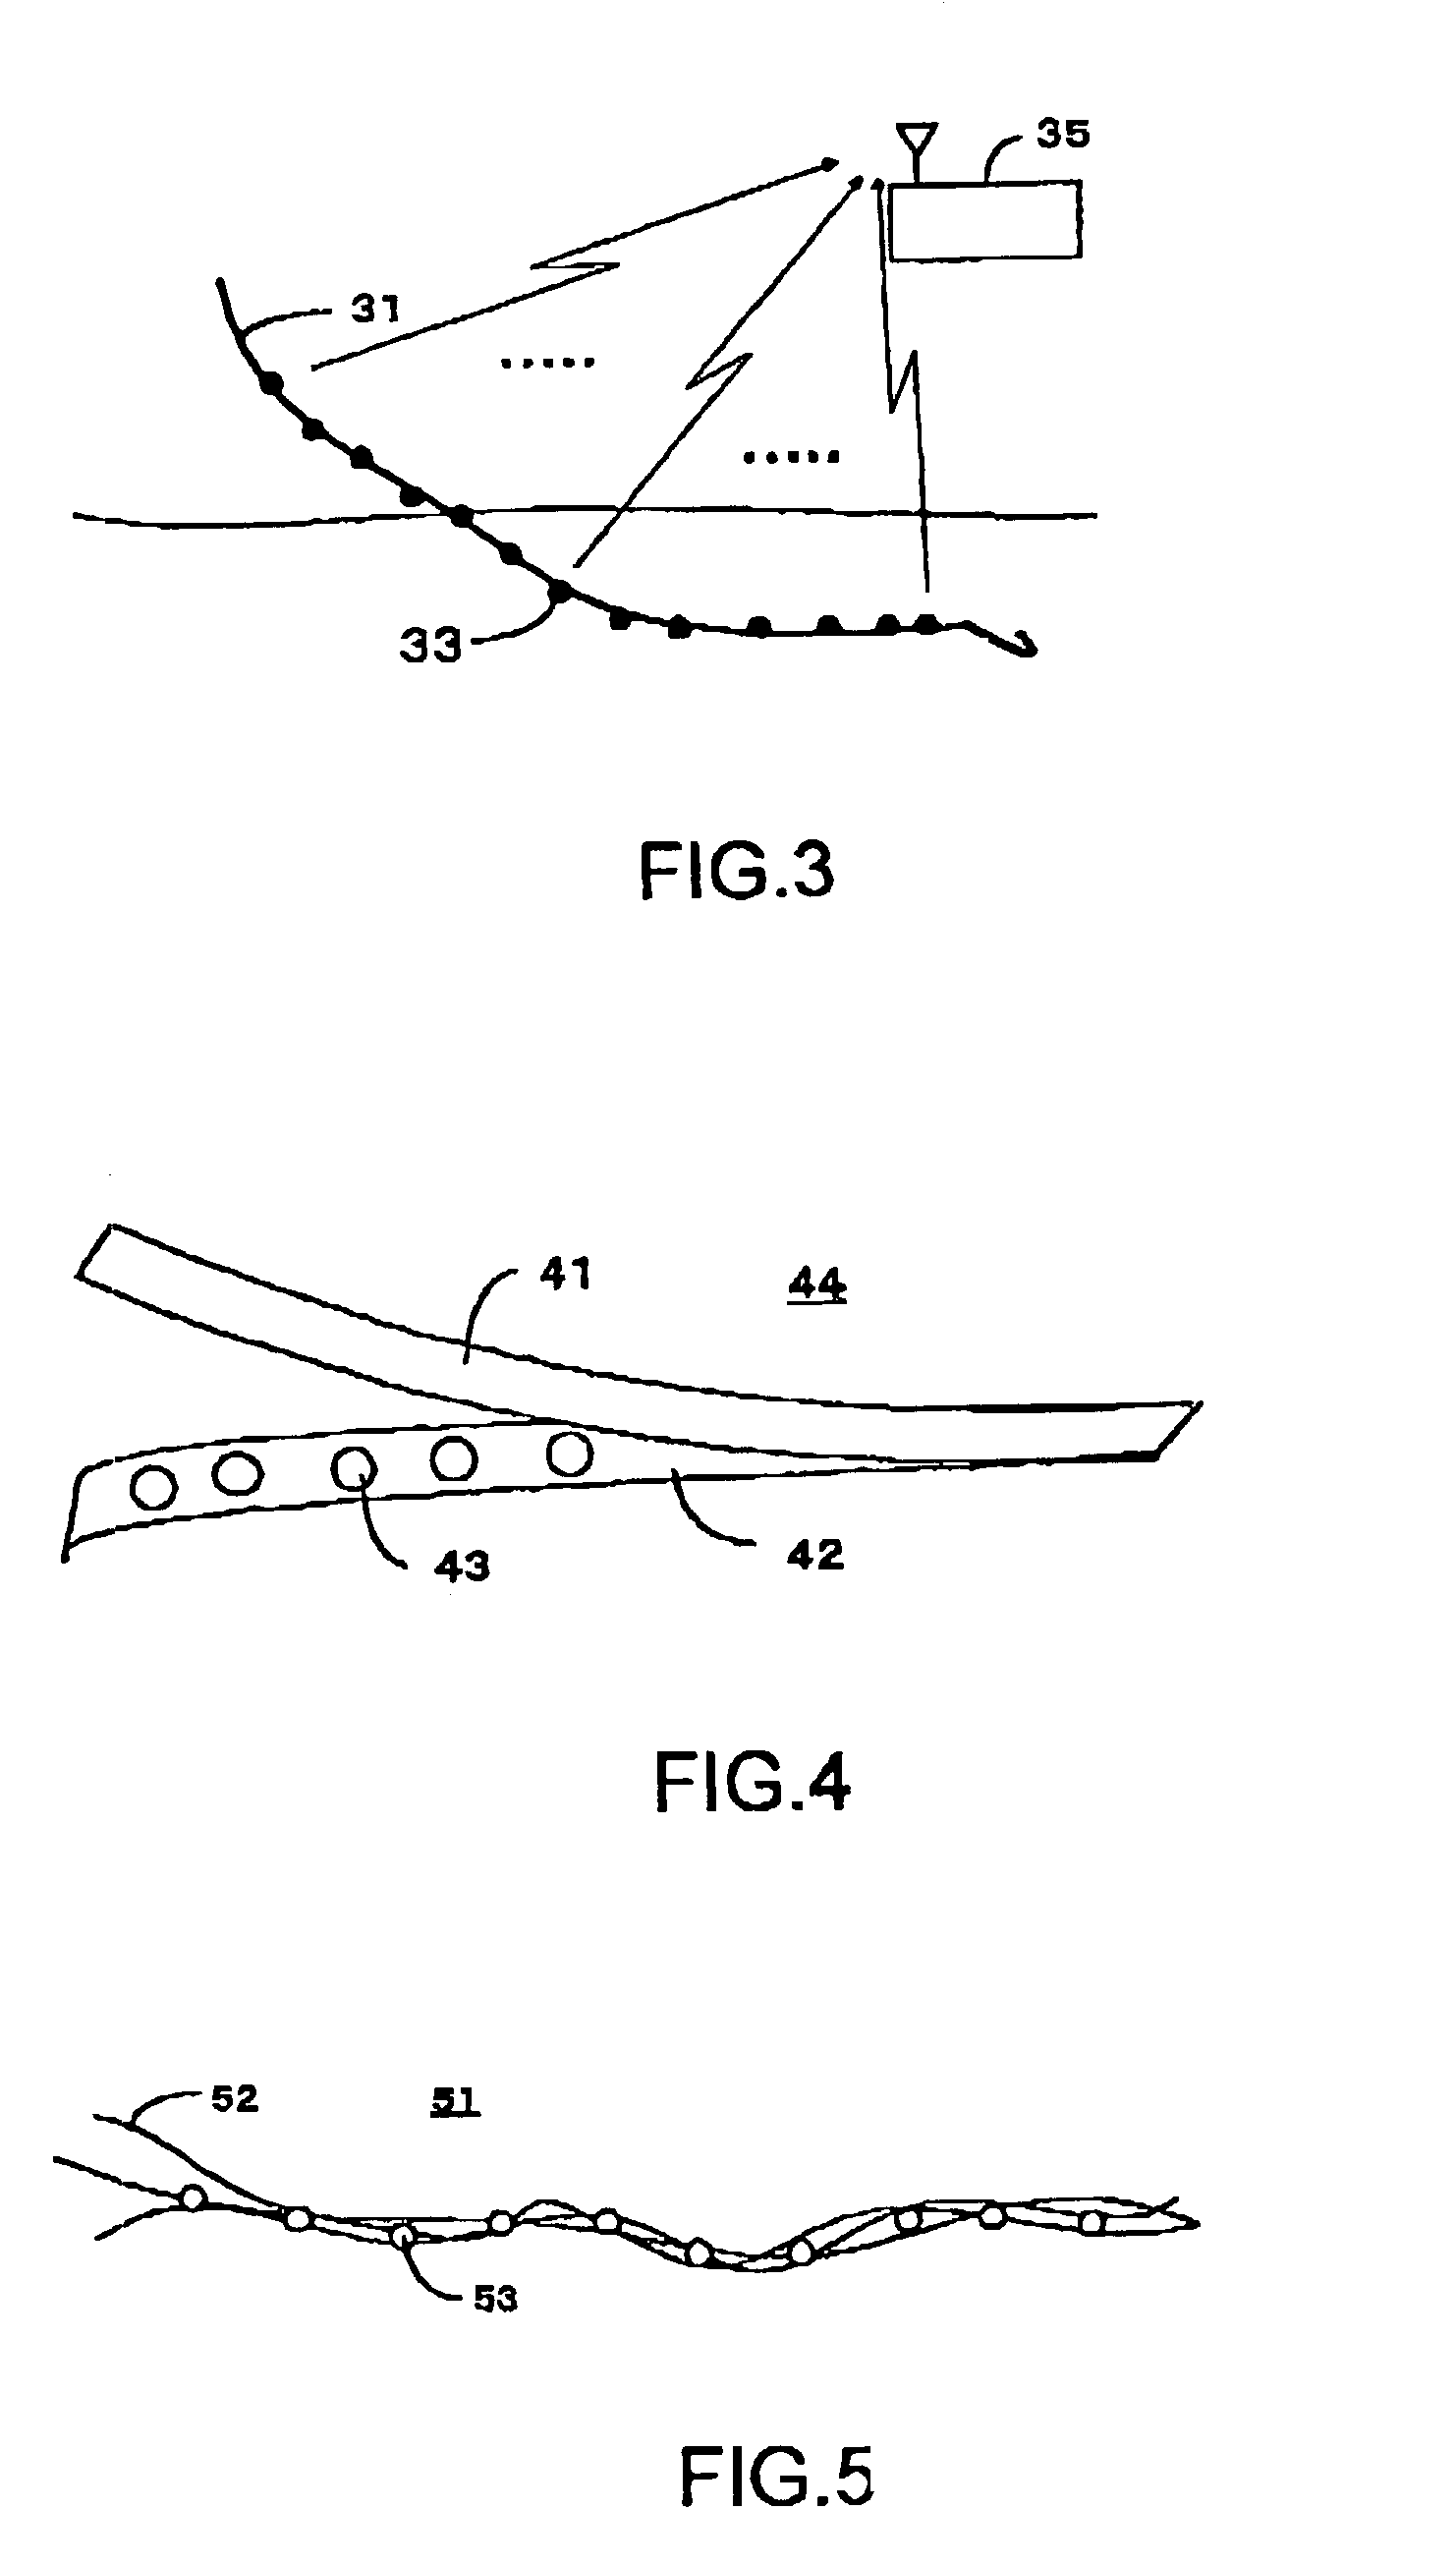 String wireless sensor and its manufacturing method